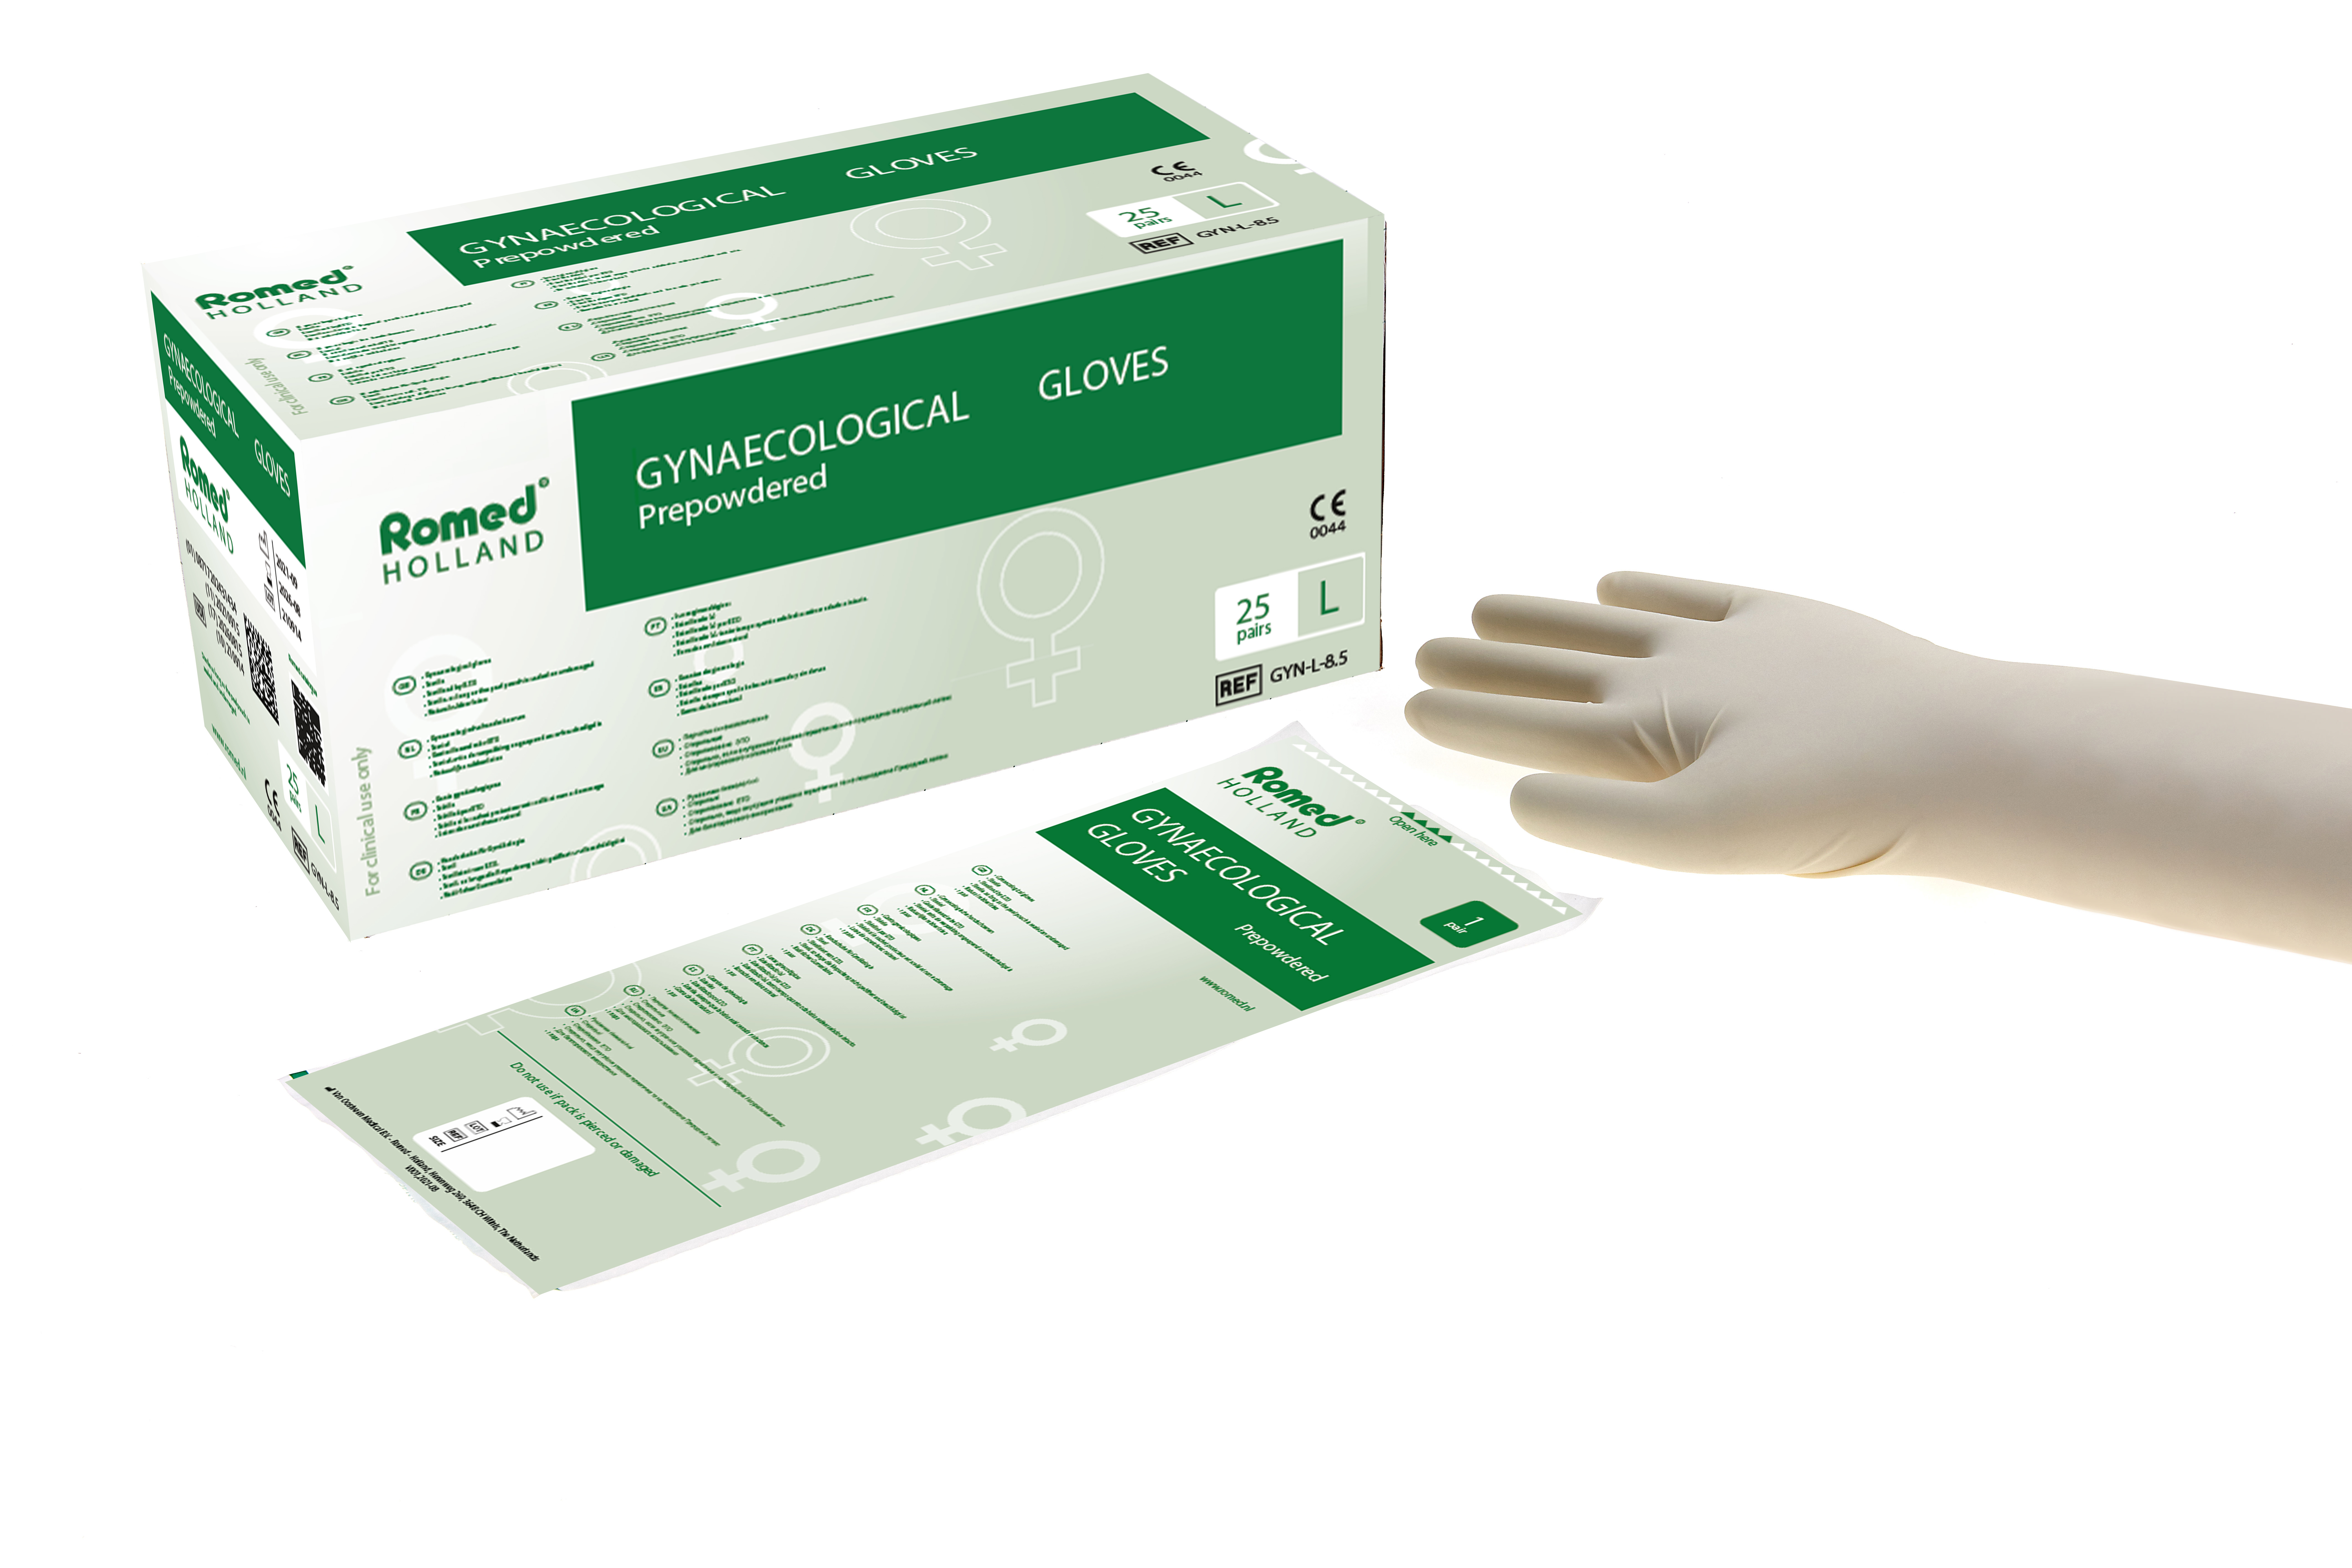 GYN-L-8.5 Romed gynaecological gloves, length 50cm, prepowdered, size large, sterile per pair, 25 pairs in an inner box, 4 x 25 pairs = 100 pairs in a carton.